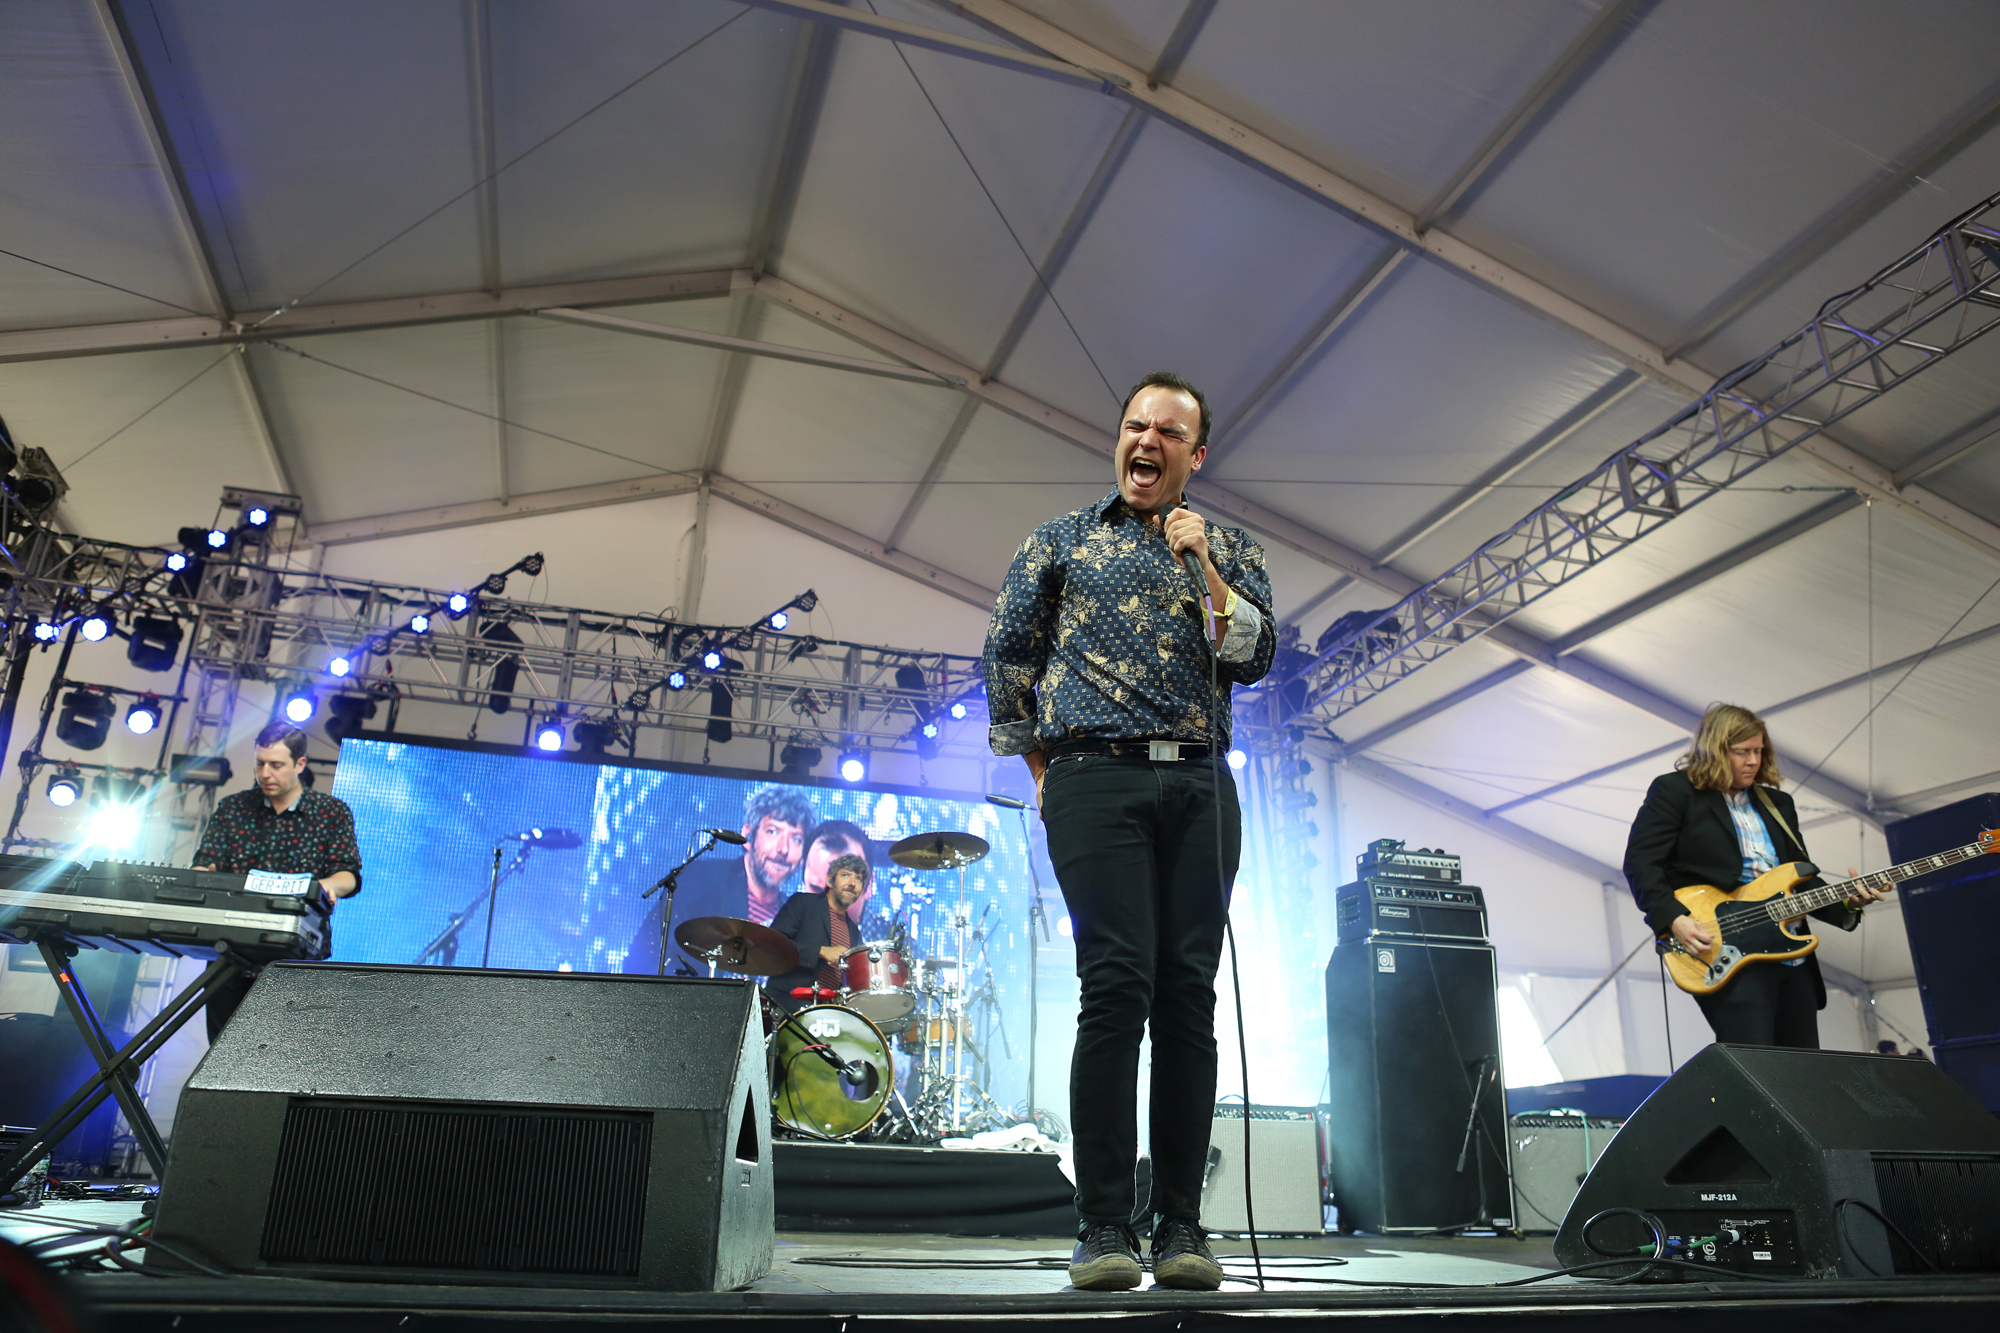 Future Islands performs in the Gotham tent at Governors Ball on Randall's Island, New York, on June 6, 2015. (© Michael Katzif – Do not use or republish without prior consent.)